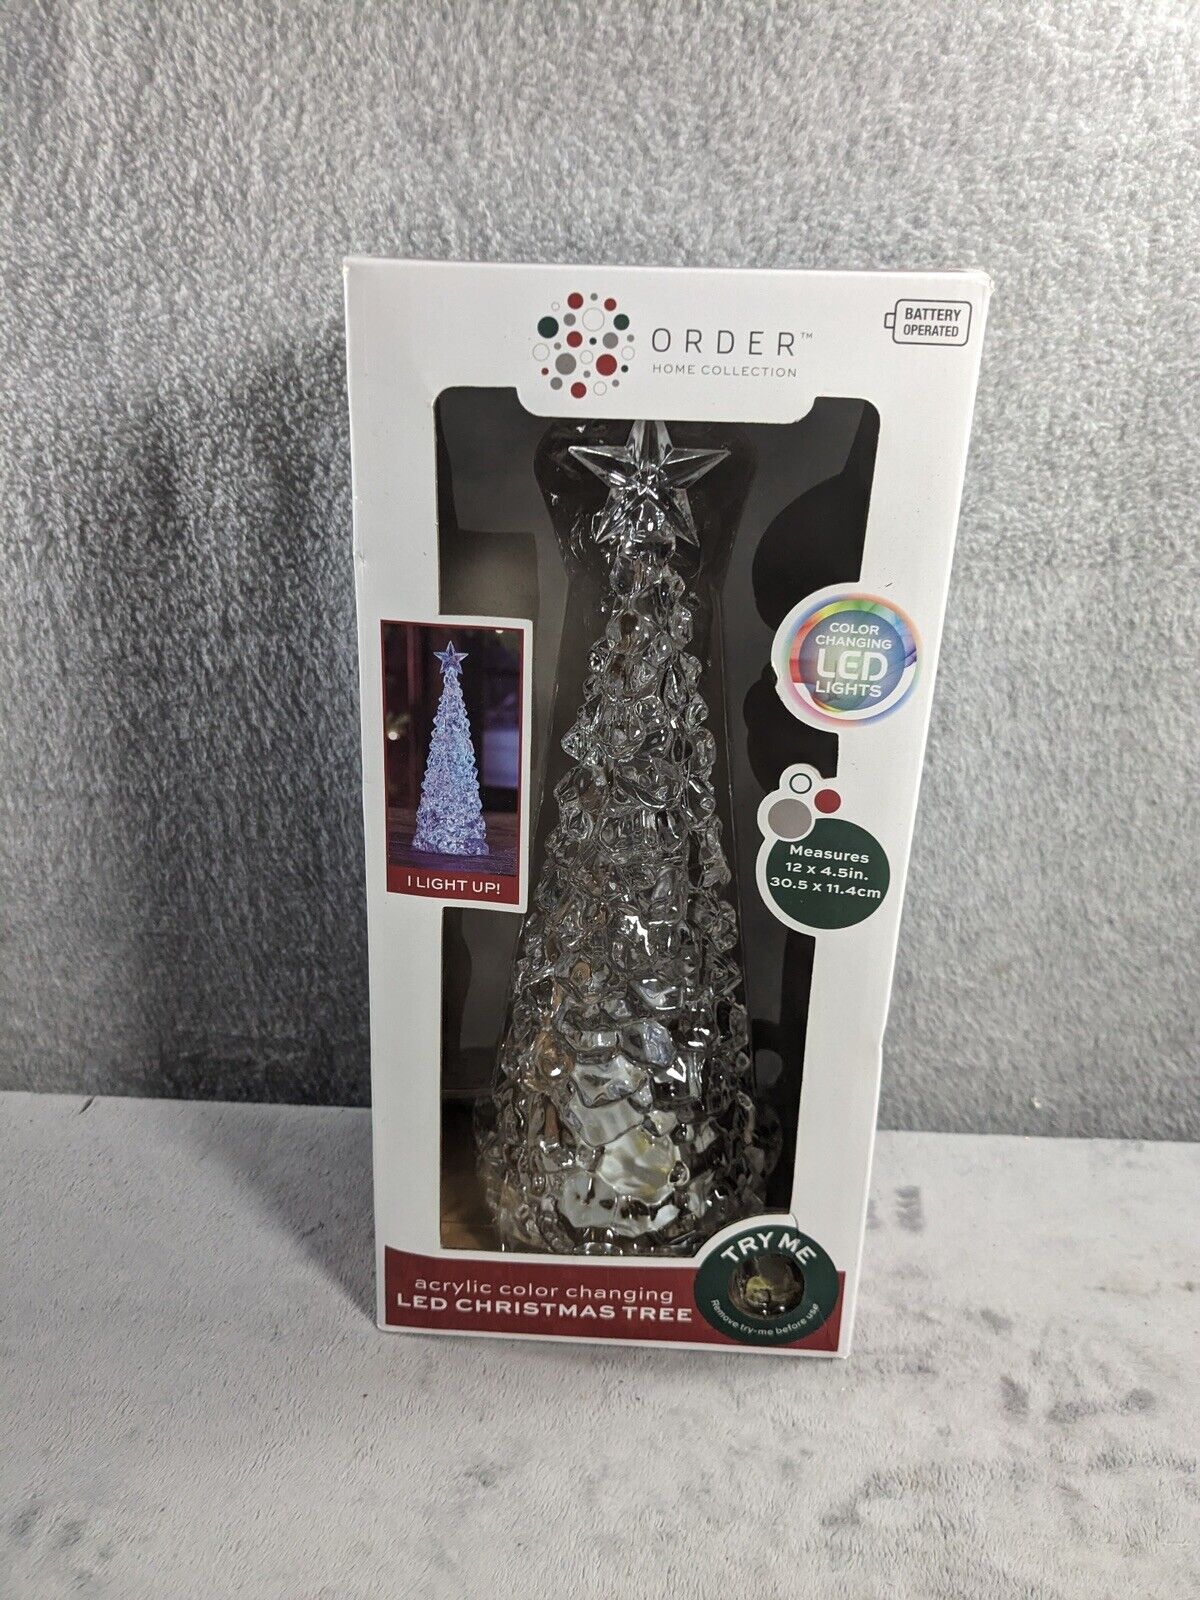 Order Acrylic LED CHRISTMAS TREE COLOR CHANGING TREE 12” Tall